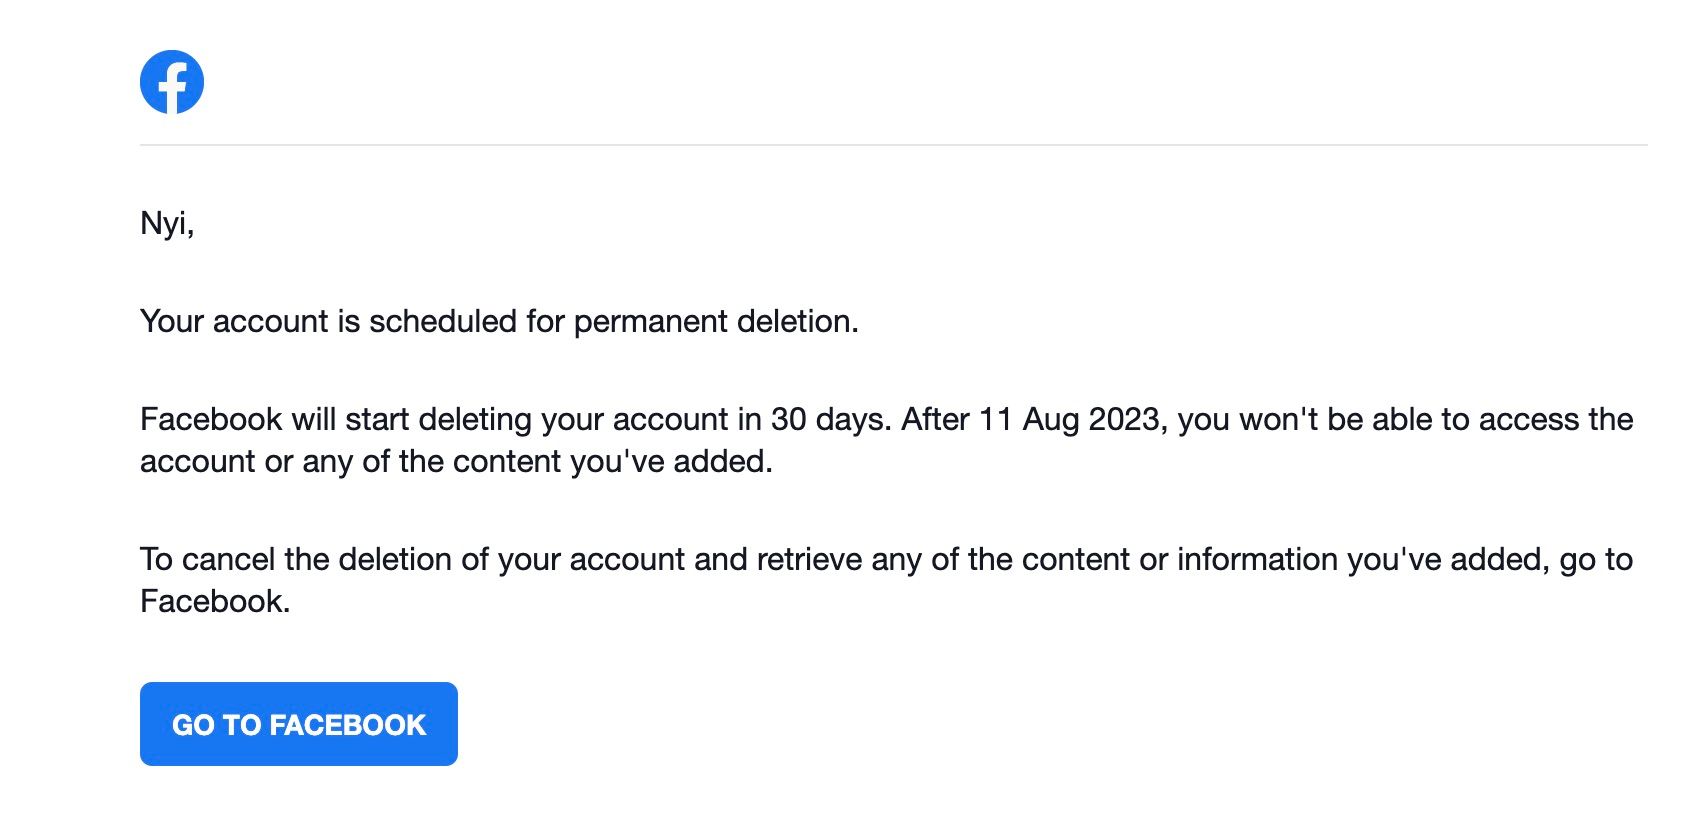 Facebook email announcing account deletion